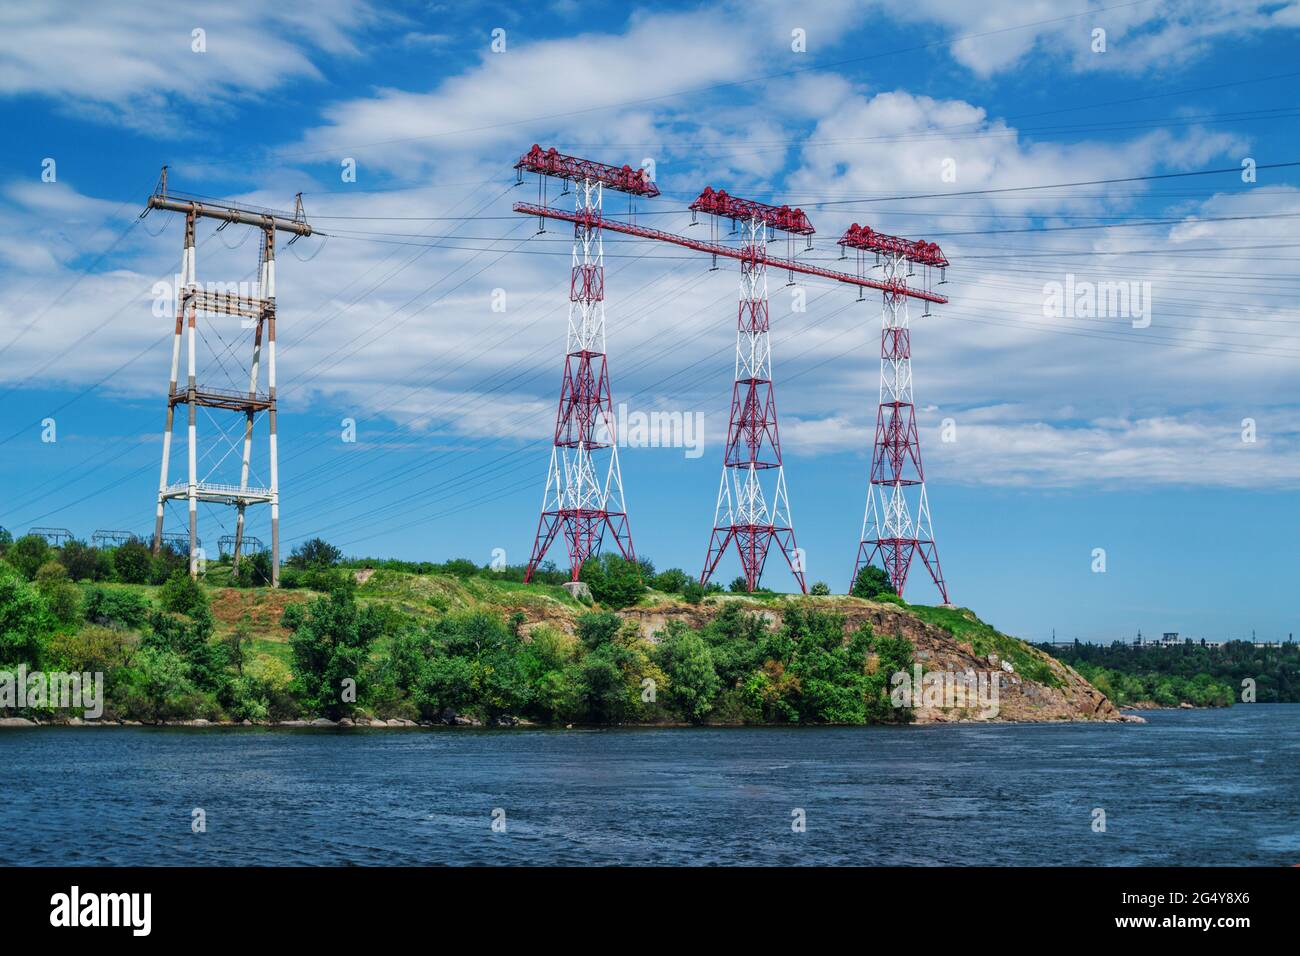 Electricity transmission towers on the river bank. Summer landscape with high voltage post, green trees and blue sky. Stock Photo